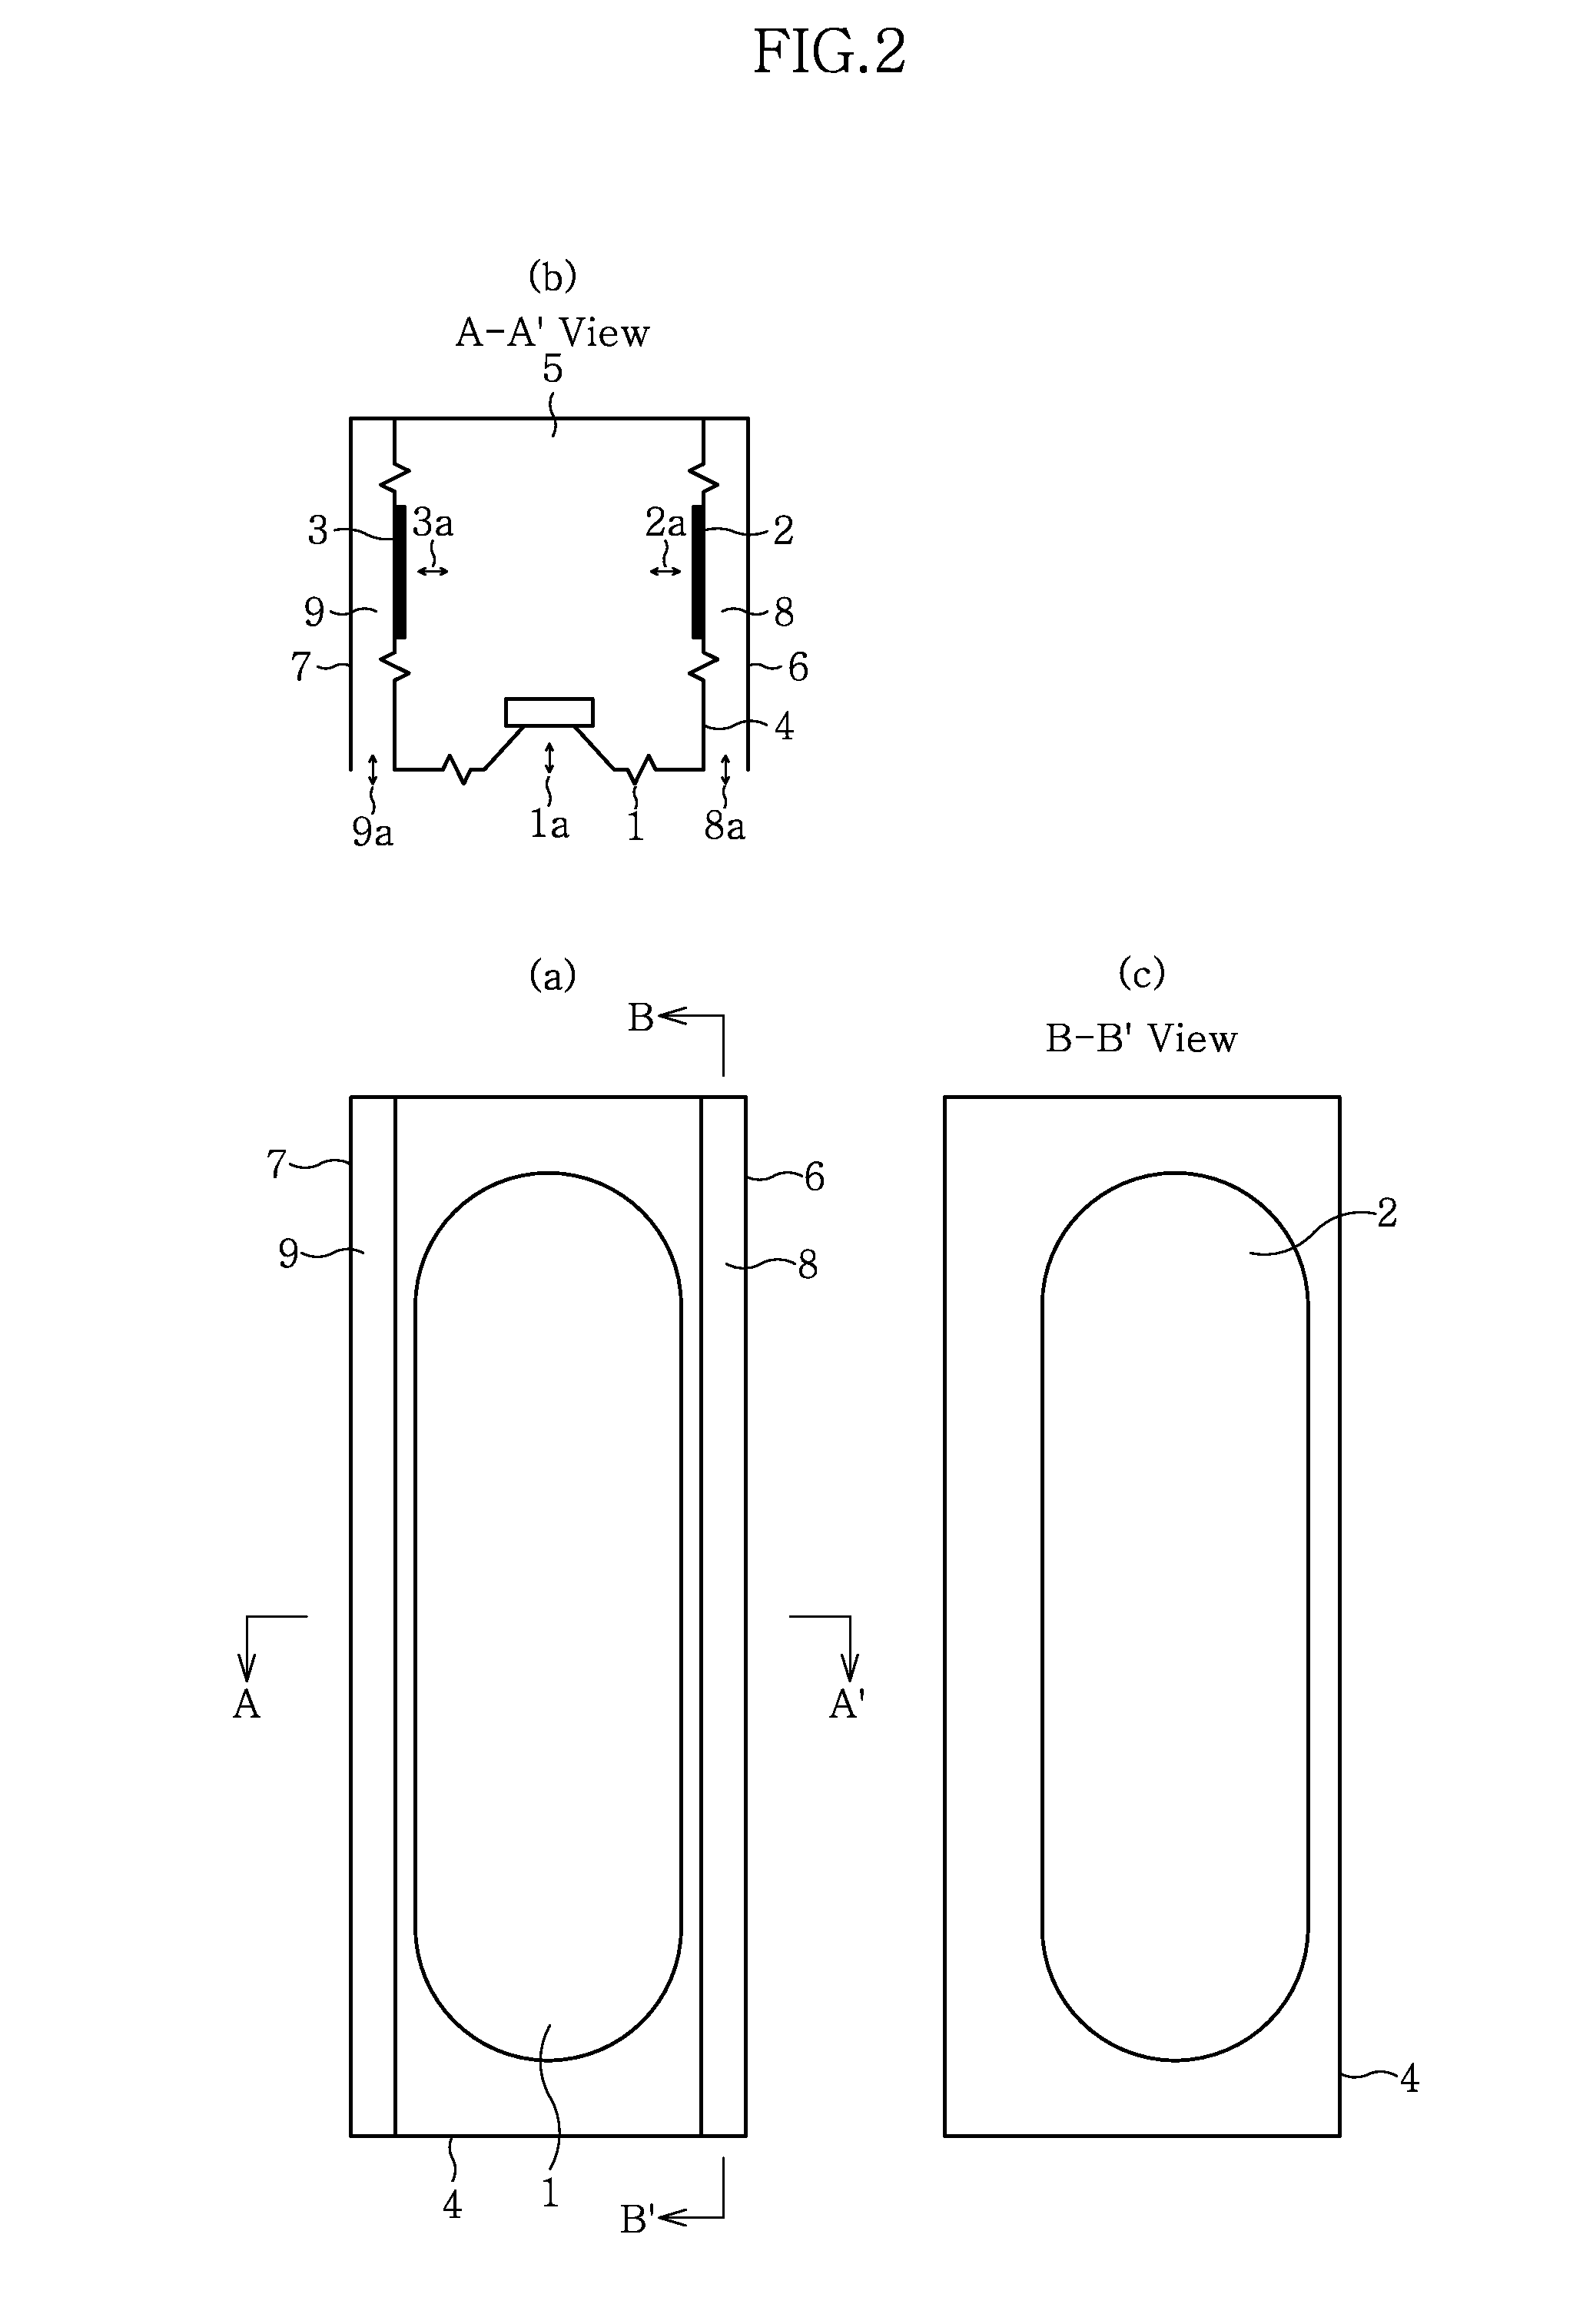 Speaker system and sound reproduction apparatus